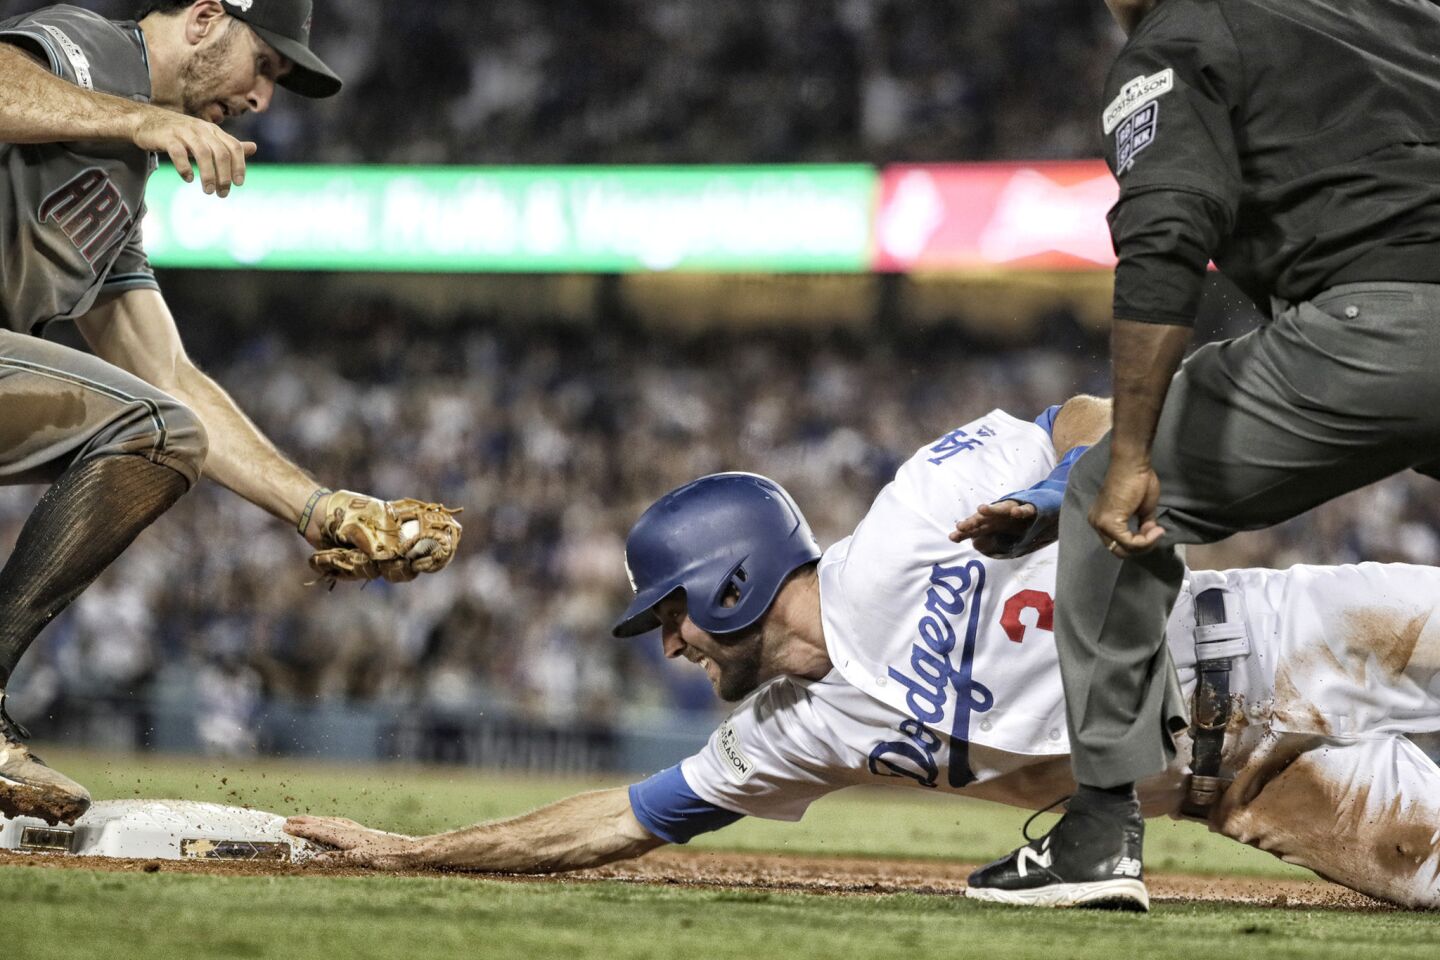 Chris Taylor dives back safely to third base as Diamondback Adam Rosales comes late with the tag during a three-run fourth inning for the Dodgers in Game 1 of the NLDS.